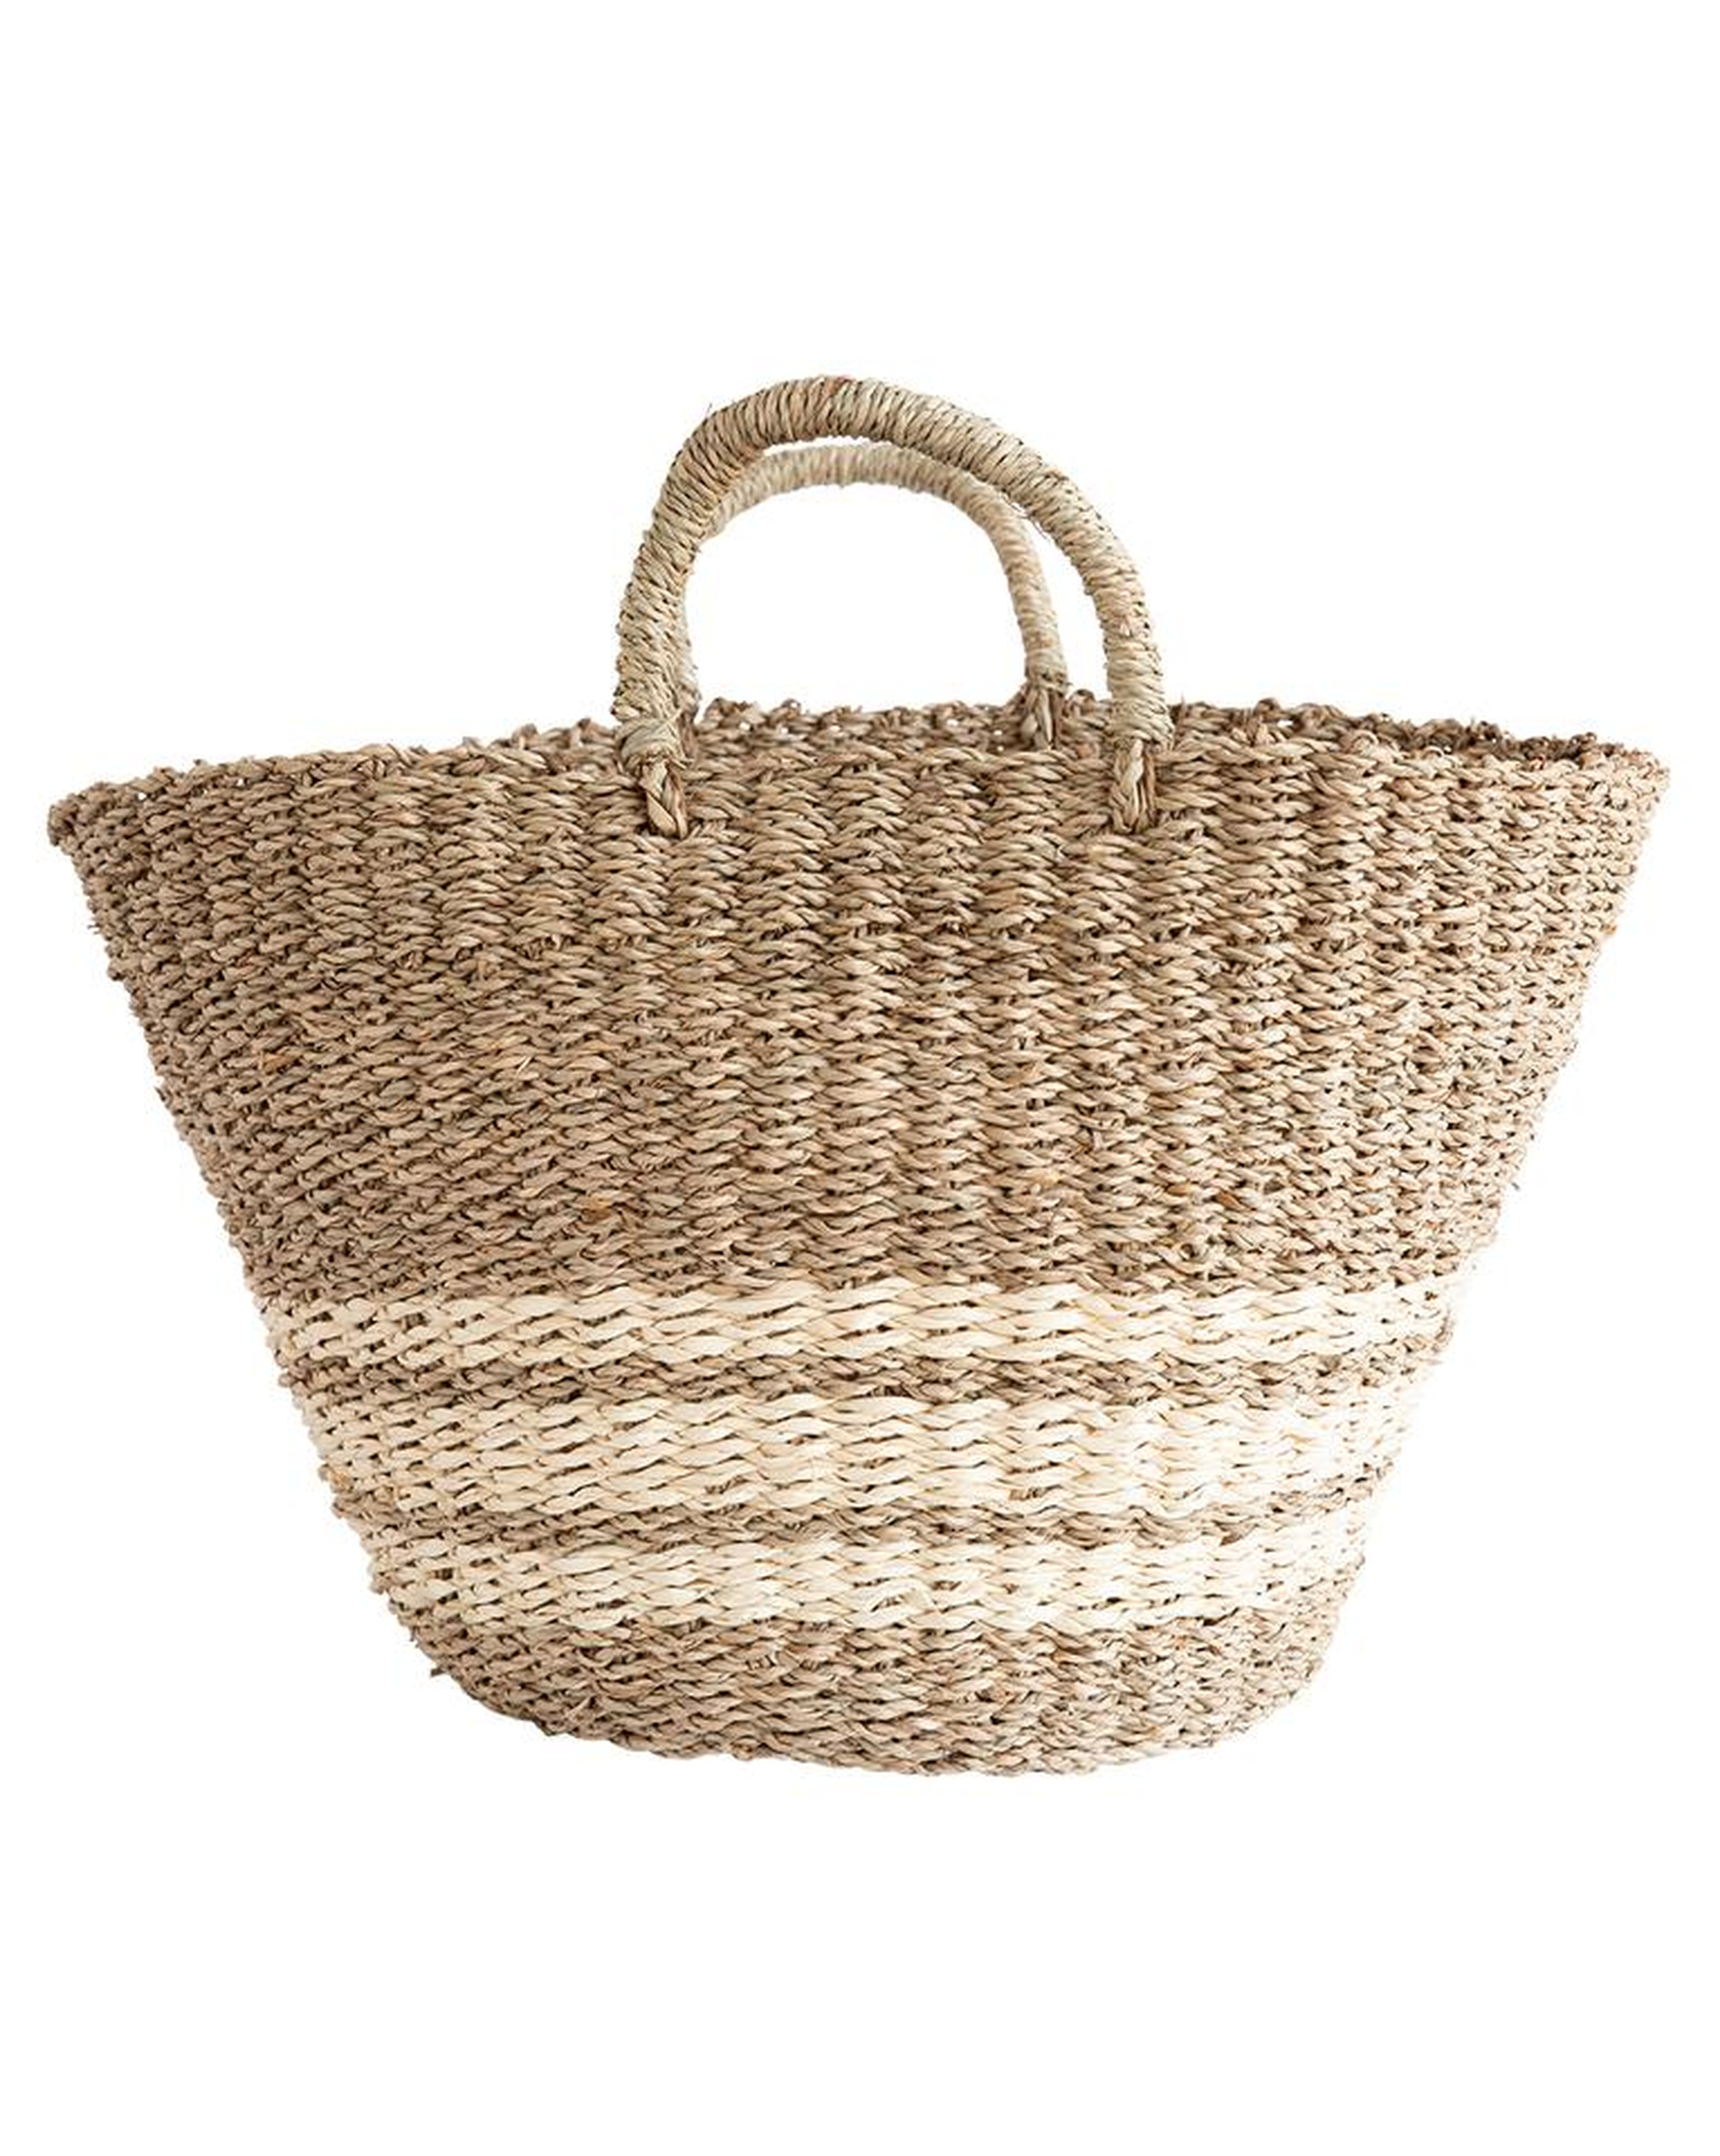 SEAGRASS & PALM BASKET - LARGE - McGee & Co.